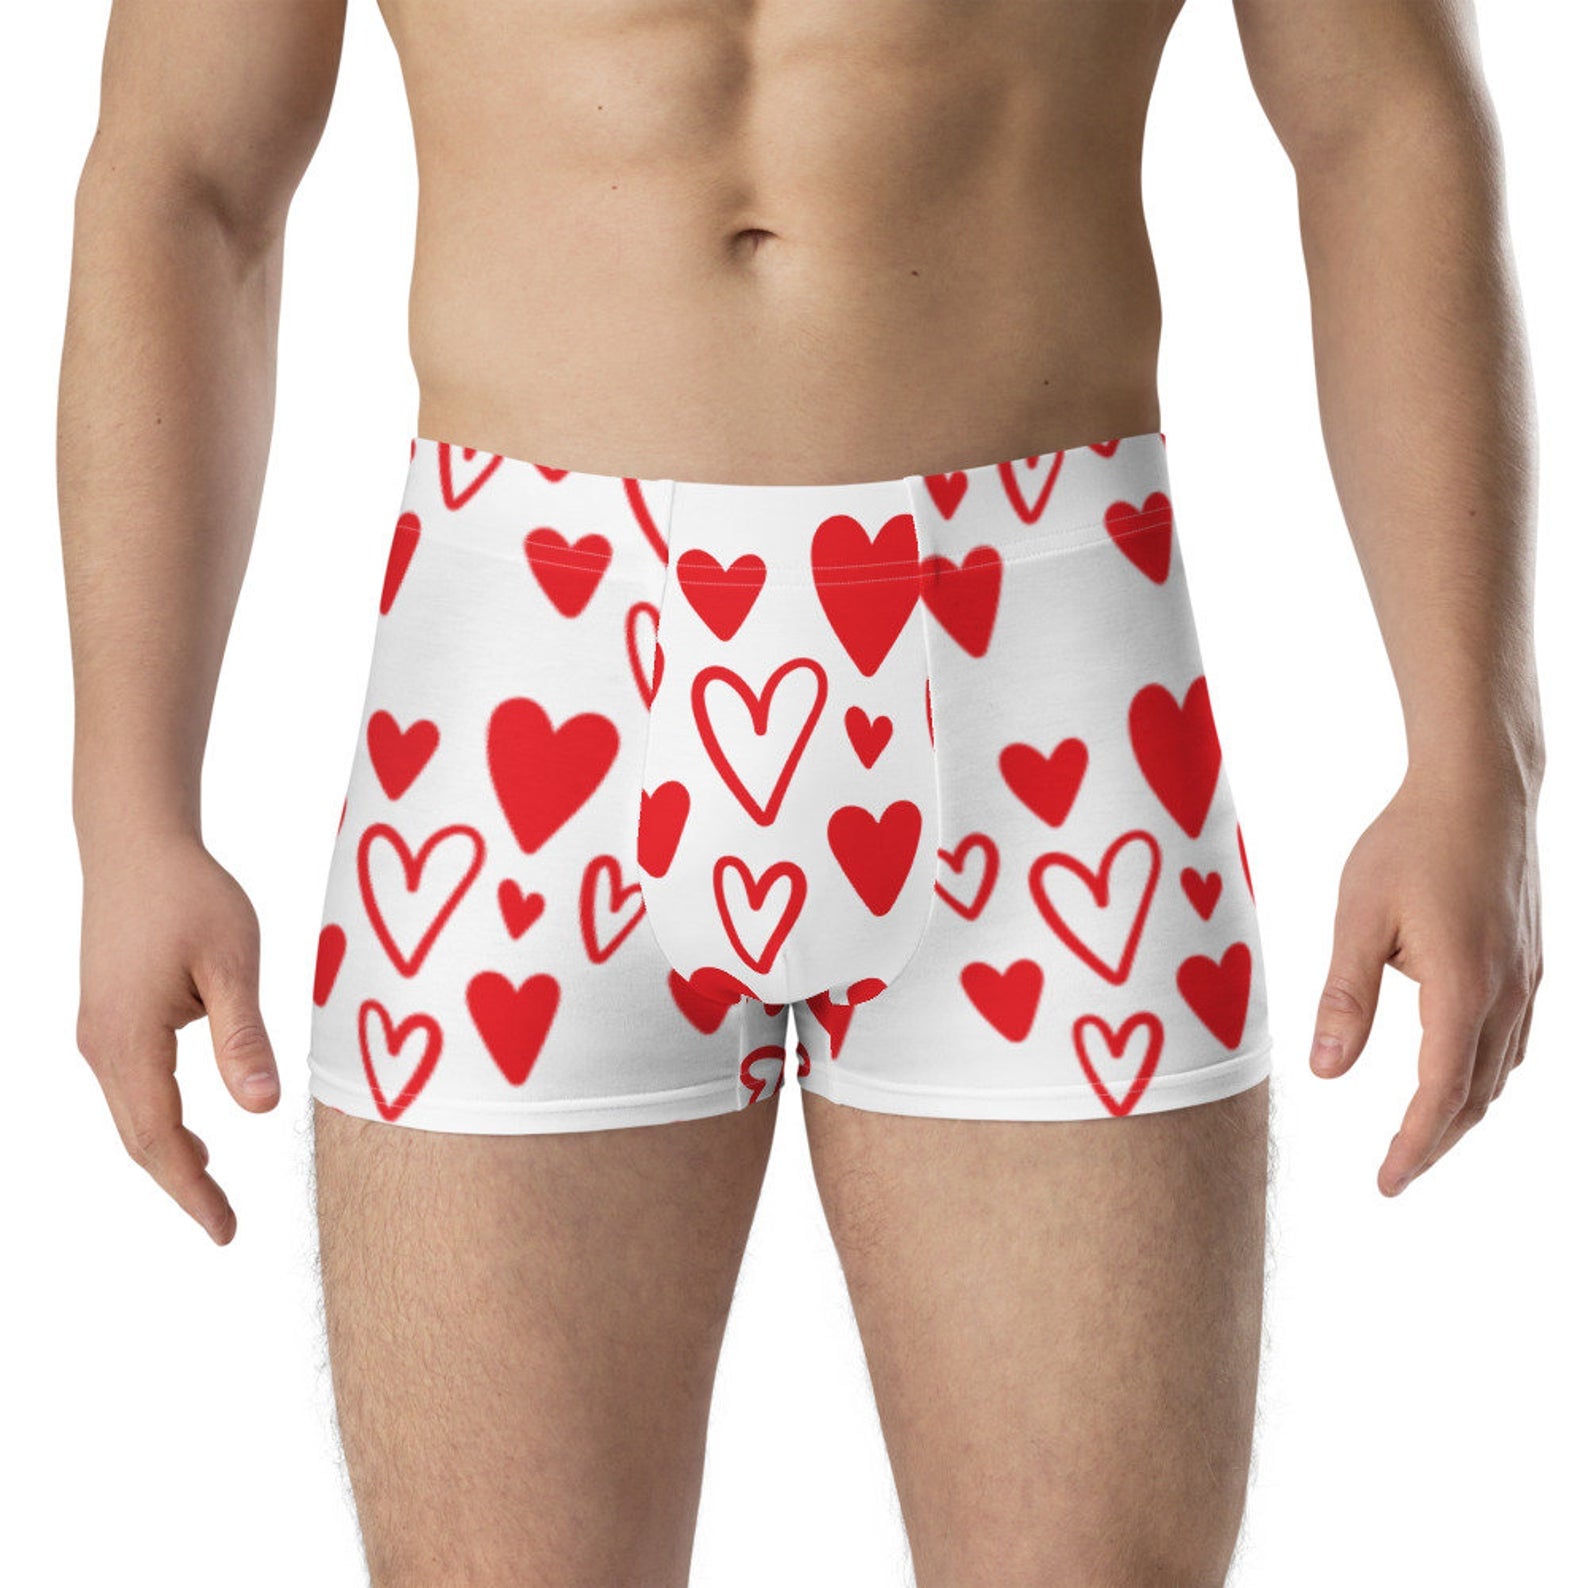 Briefly Stated You Turn Me On Love Style Mens Boxer Shorts